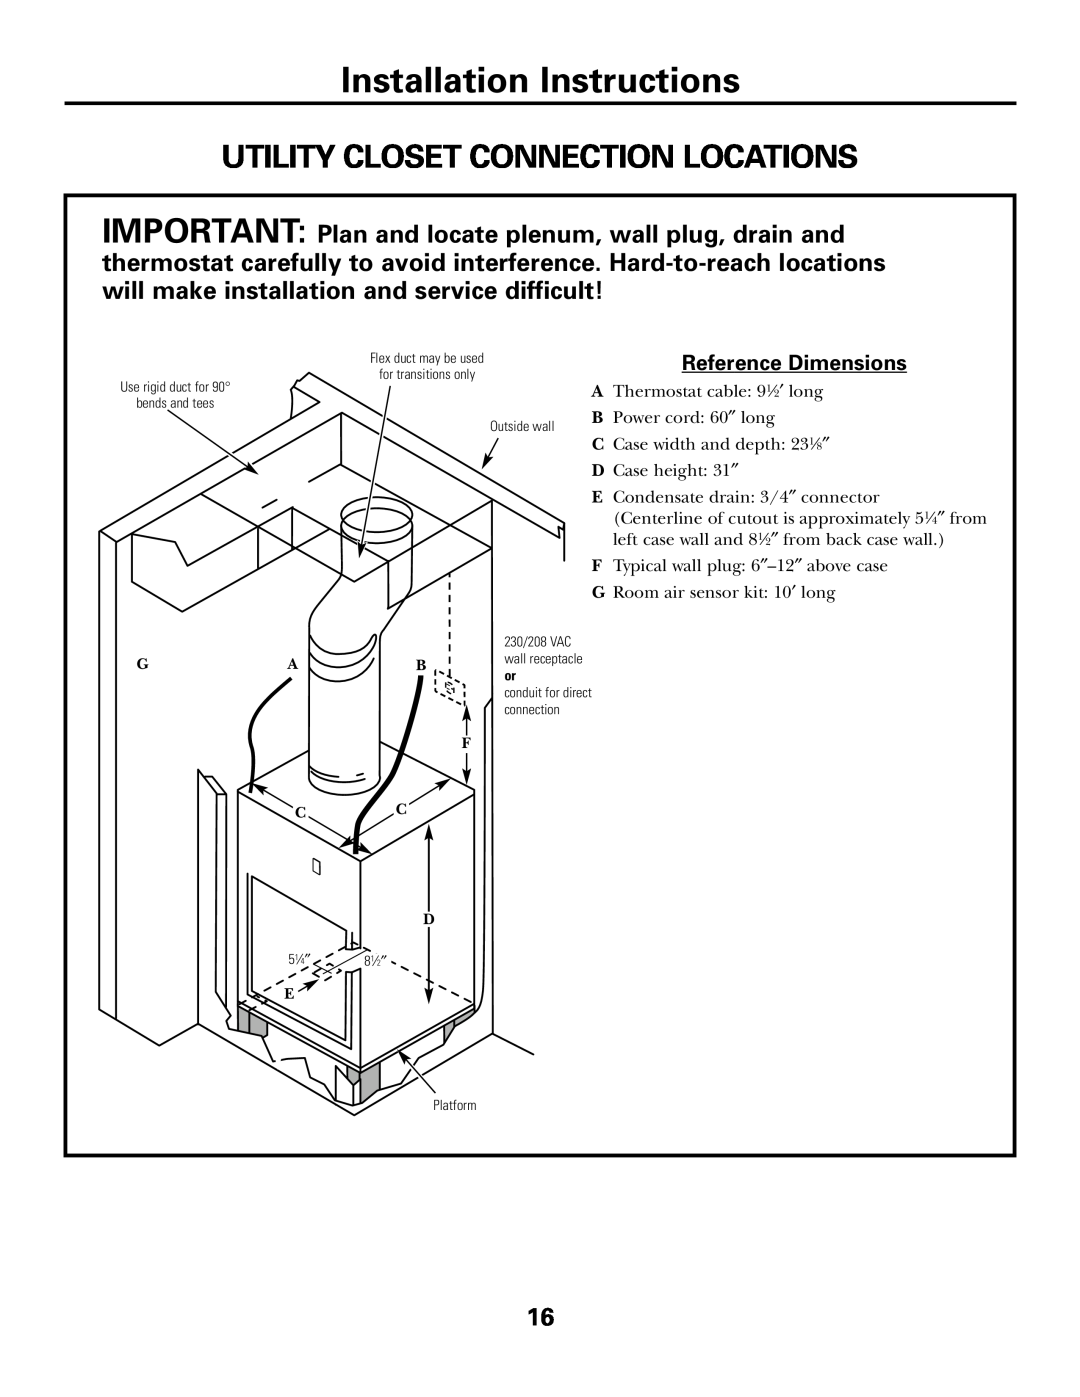 GE AZ75H18EAC, 49-7419-2 Utility Closet Connection Locations, Reference Dimensions, Installation Instructions 